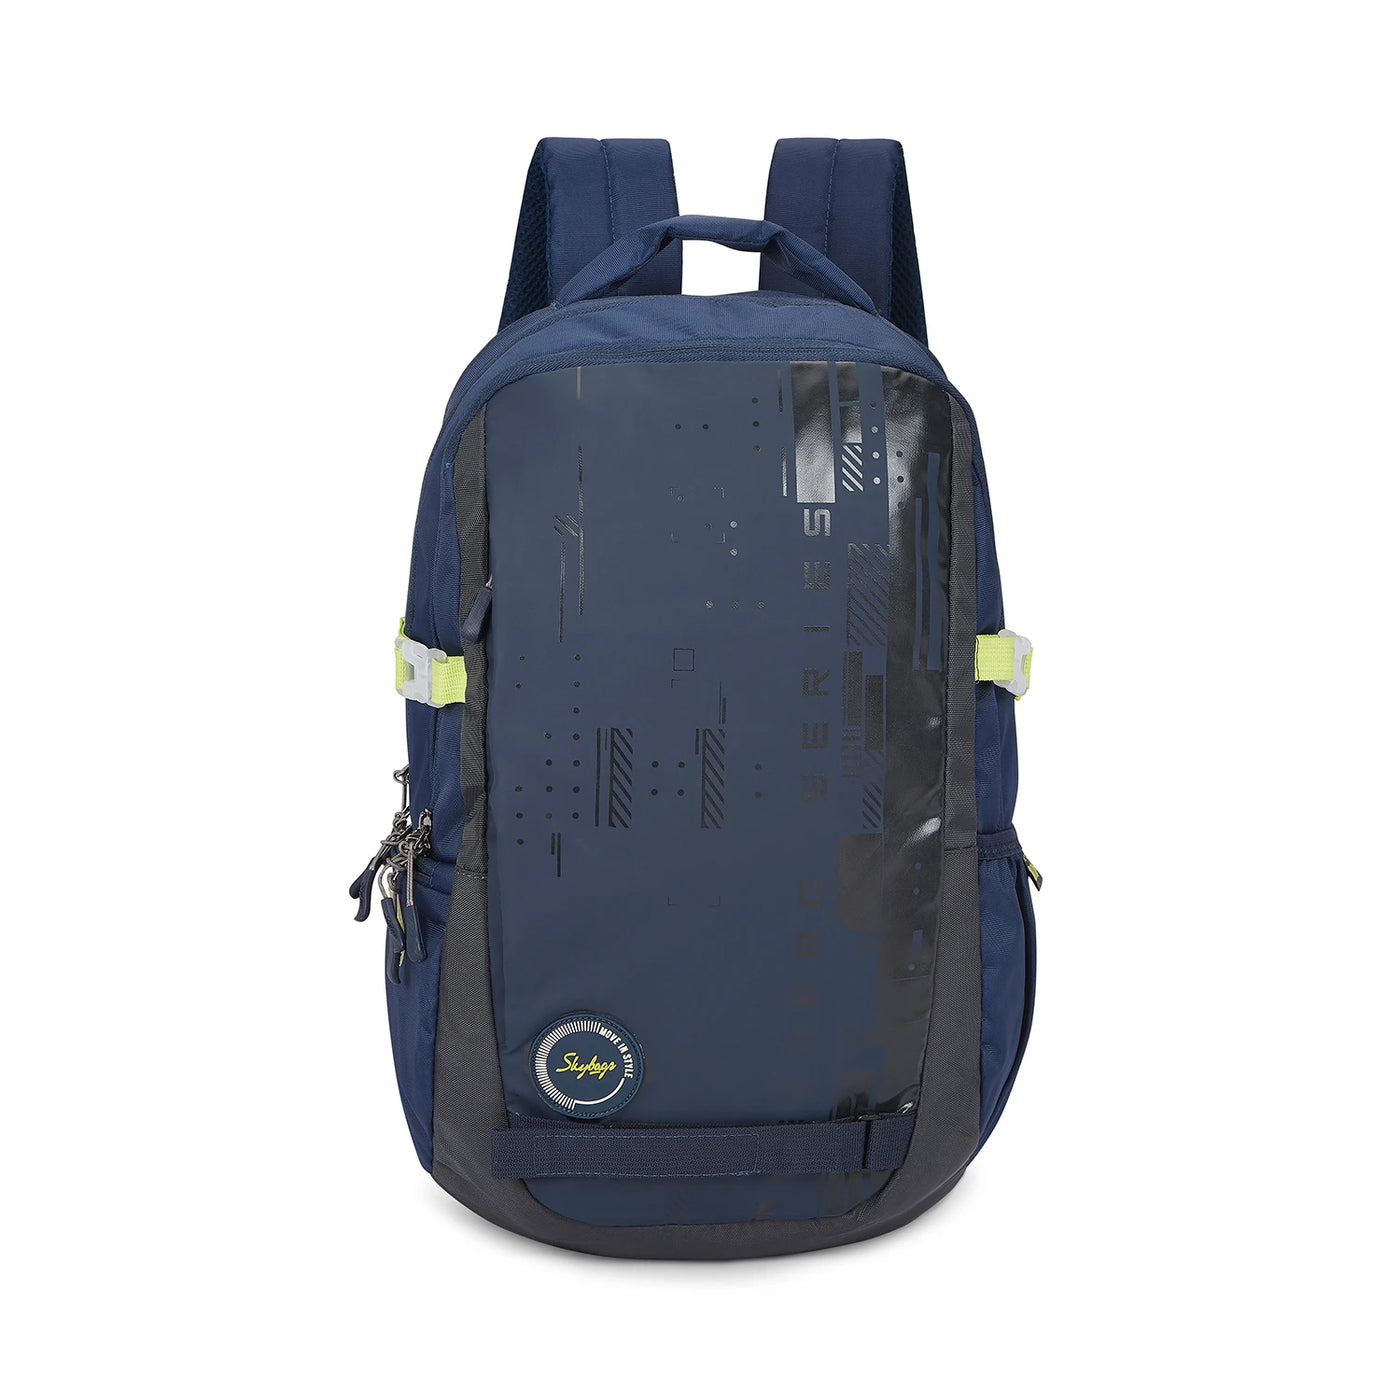 Buy Skybags Marvel Extra 03 35 Ltrs Blue Casual Backpack (Marvel Extra 03)  at Amazon.in